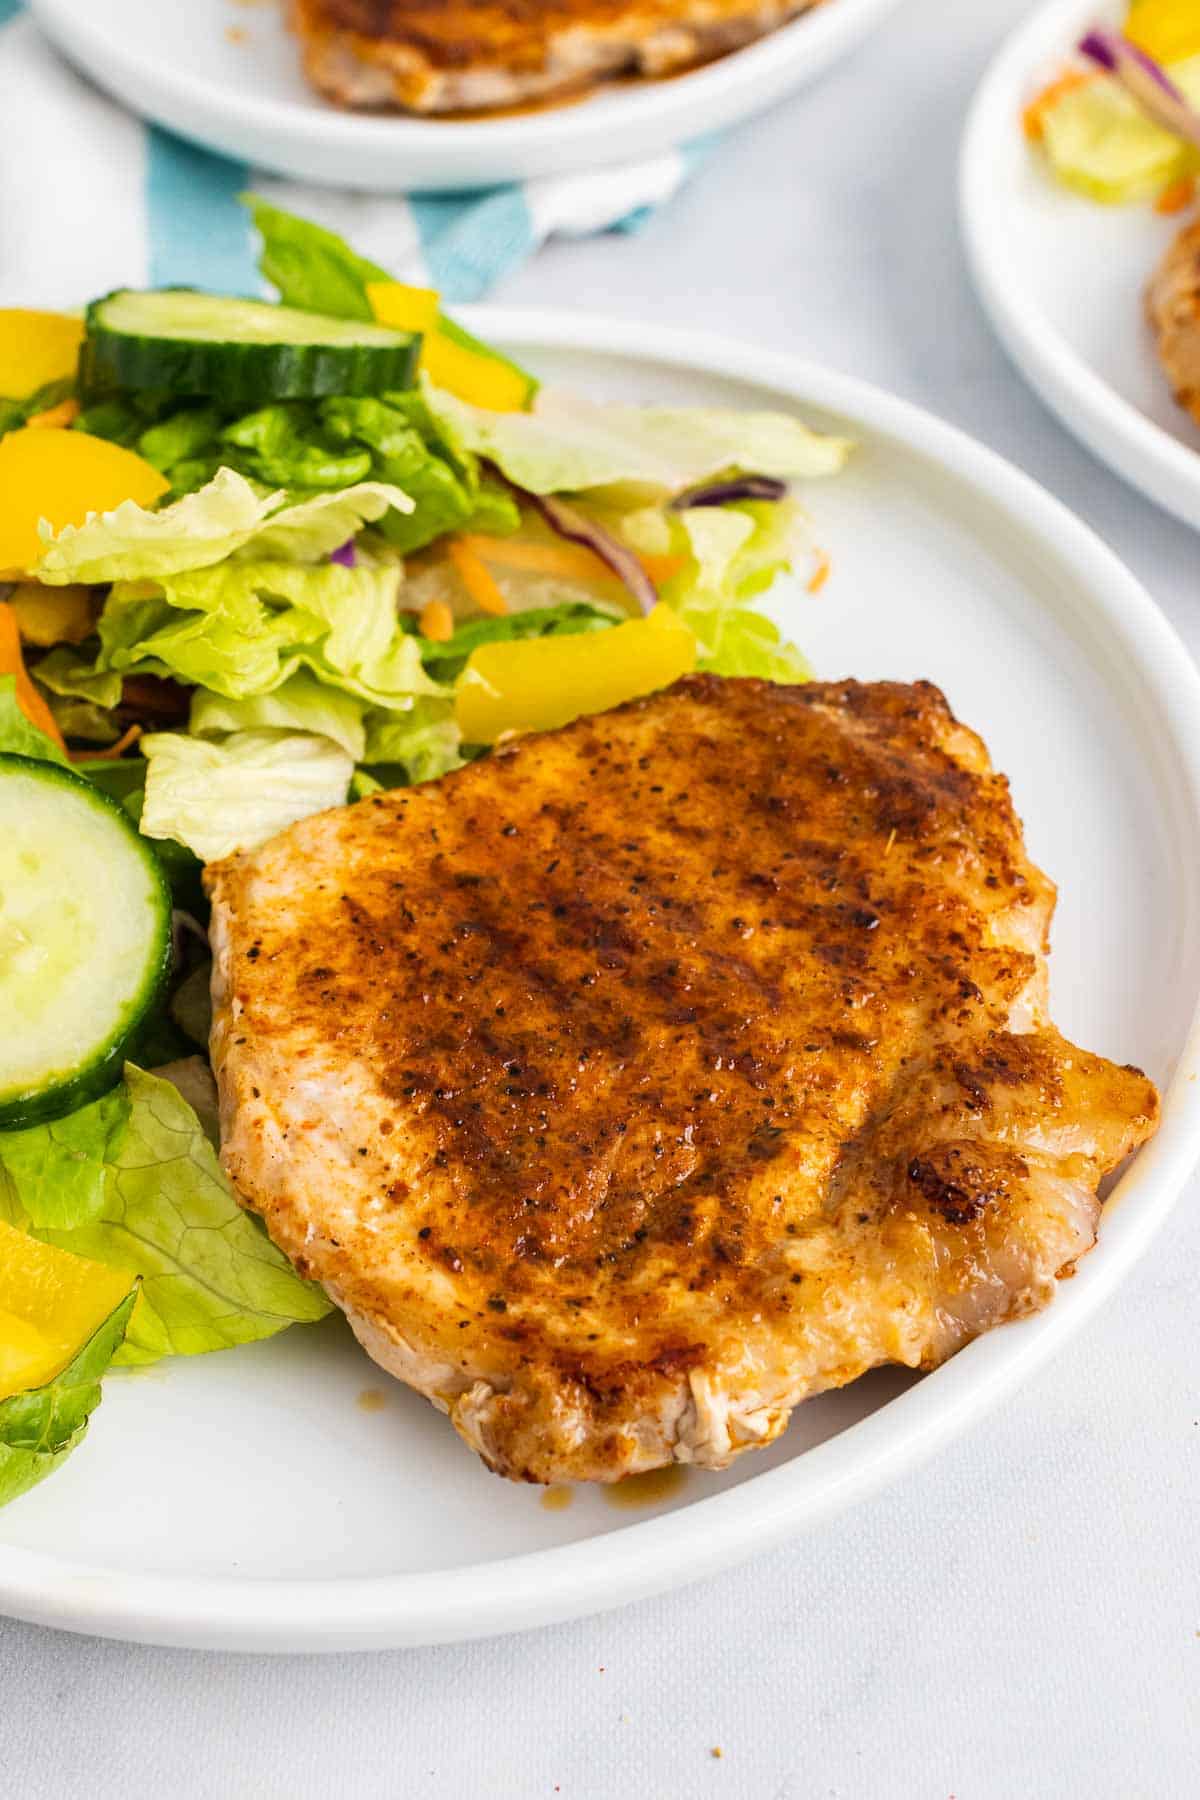 Spice-Rubbed Pork Chop on white plate with salad